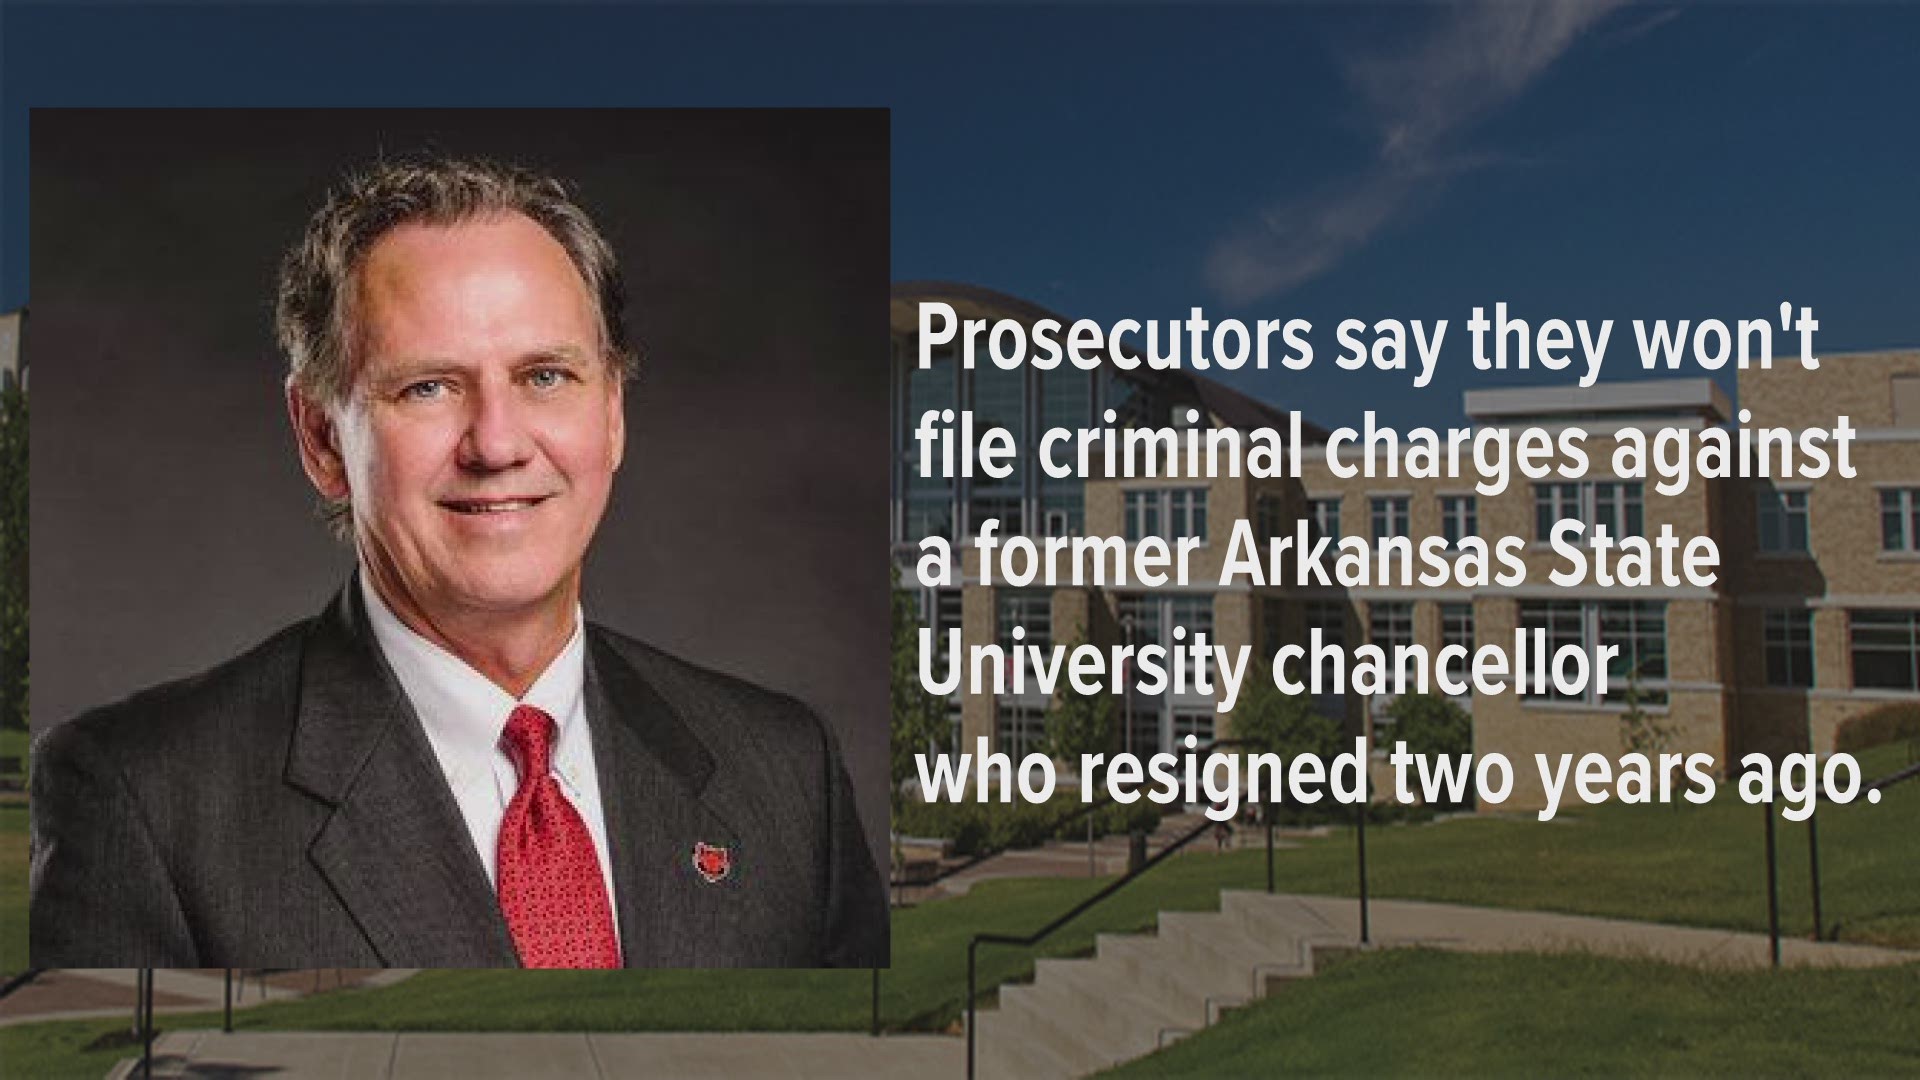 Prosecutors say they won't file criminal charges against a former Arkansas State University chancellor who resigned two years ago.